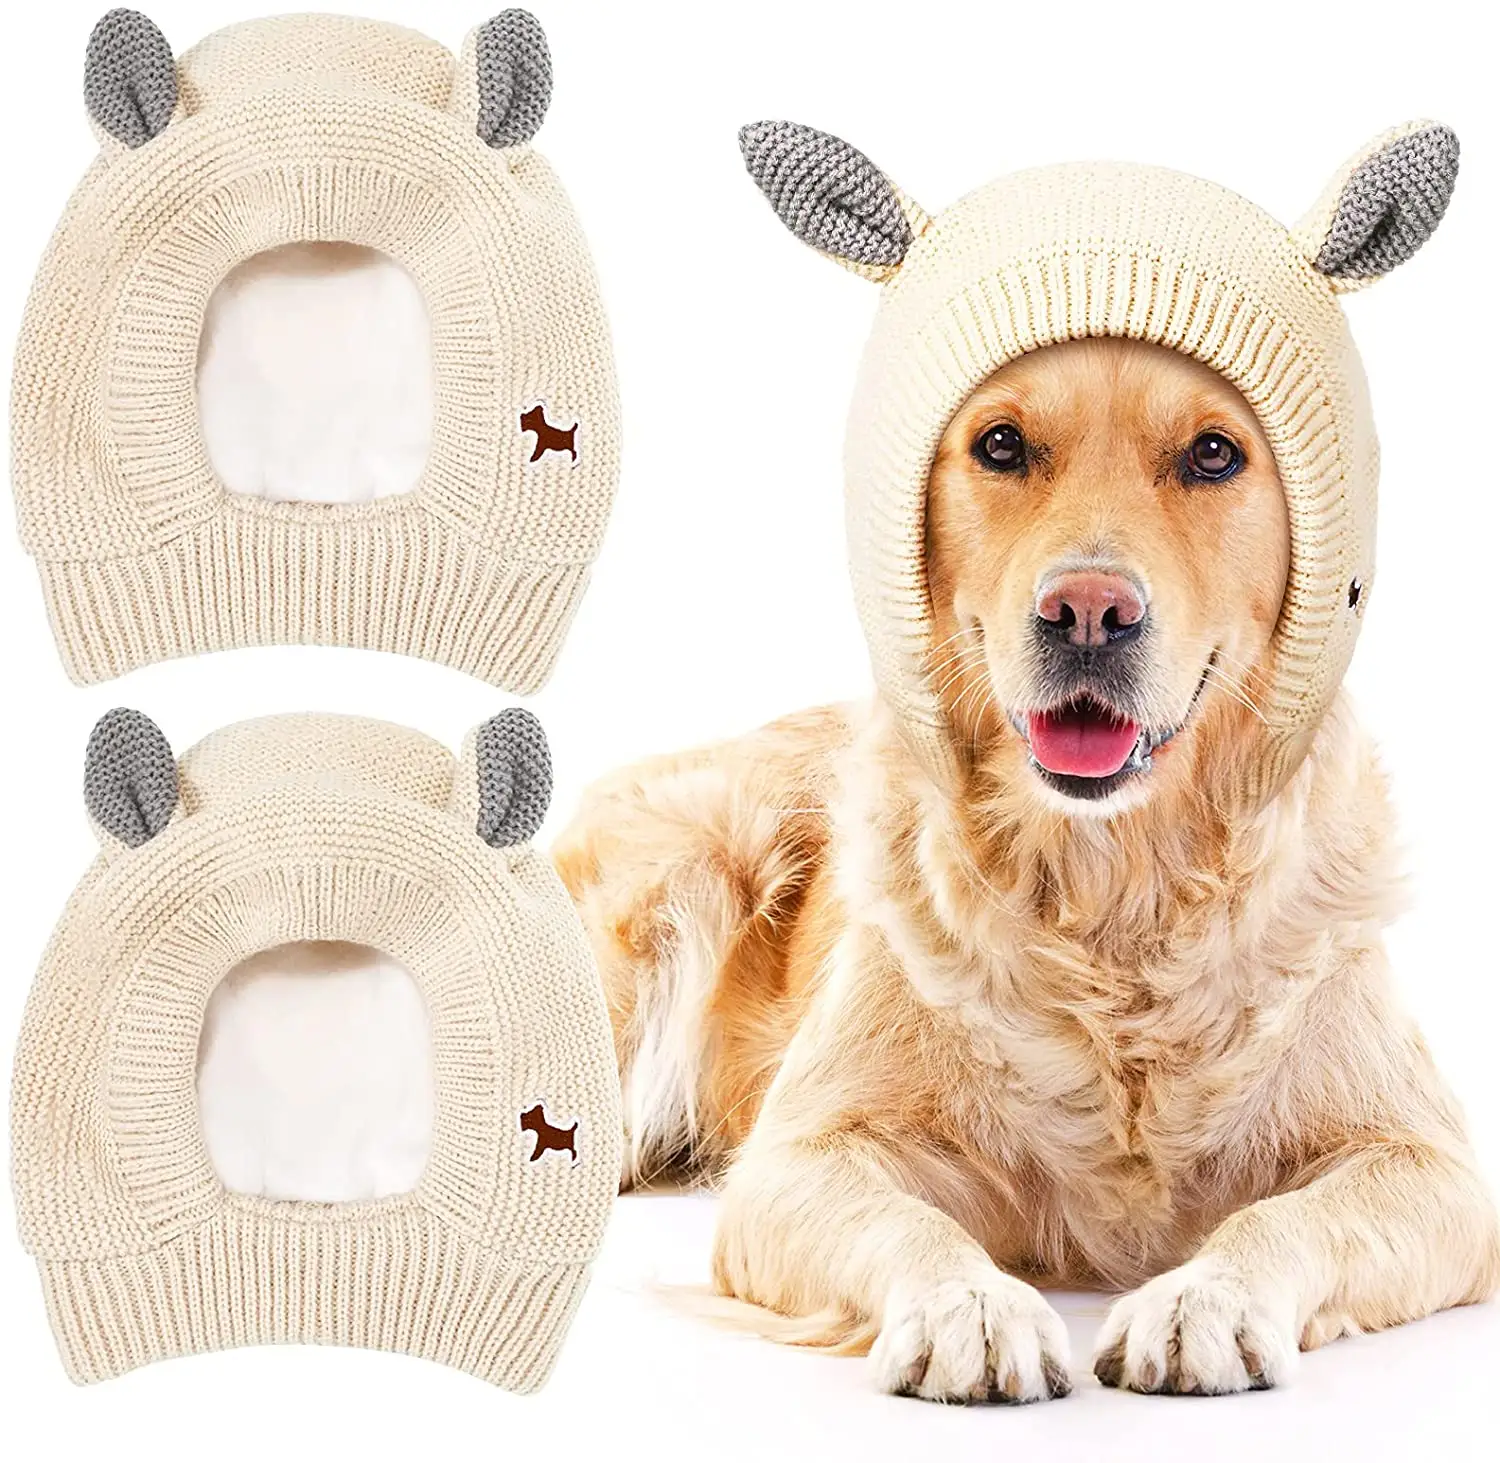 Protoiya Quiet Ears for Dogs,Noise Protection Knitted Dog Hats Pet